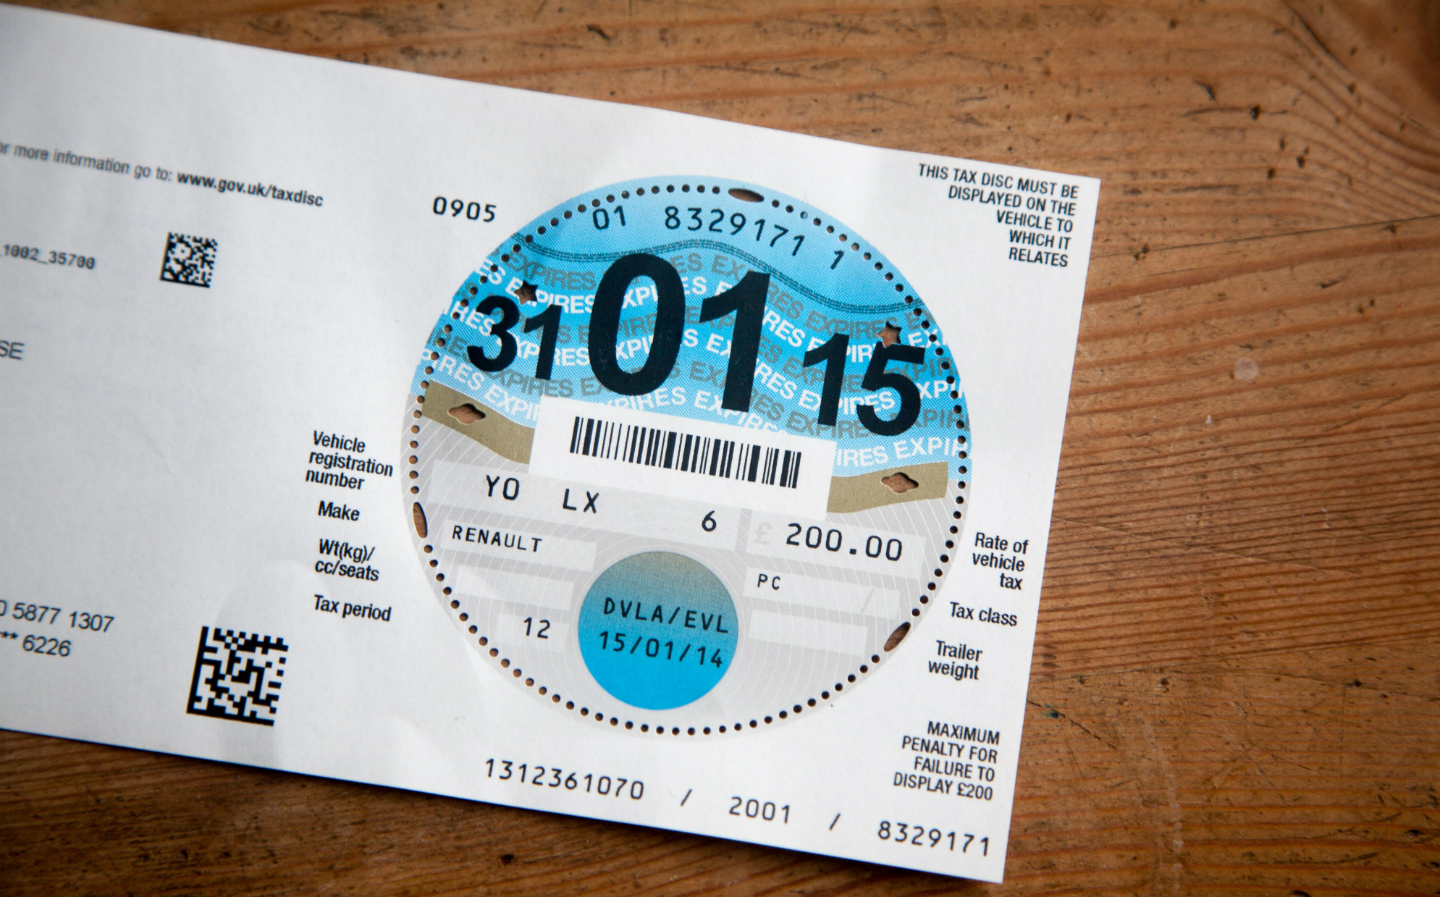 Bring back tax disc, say drivers as clamping rises